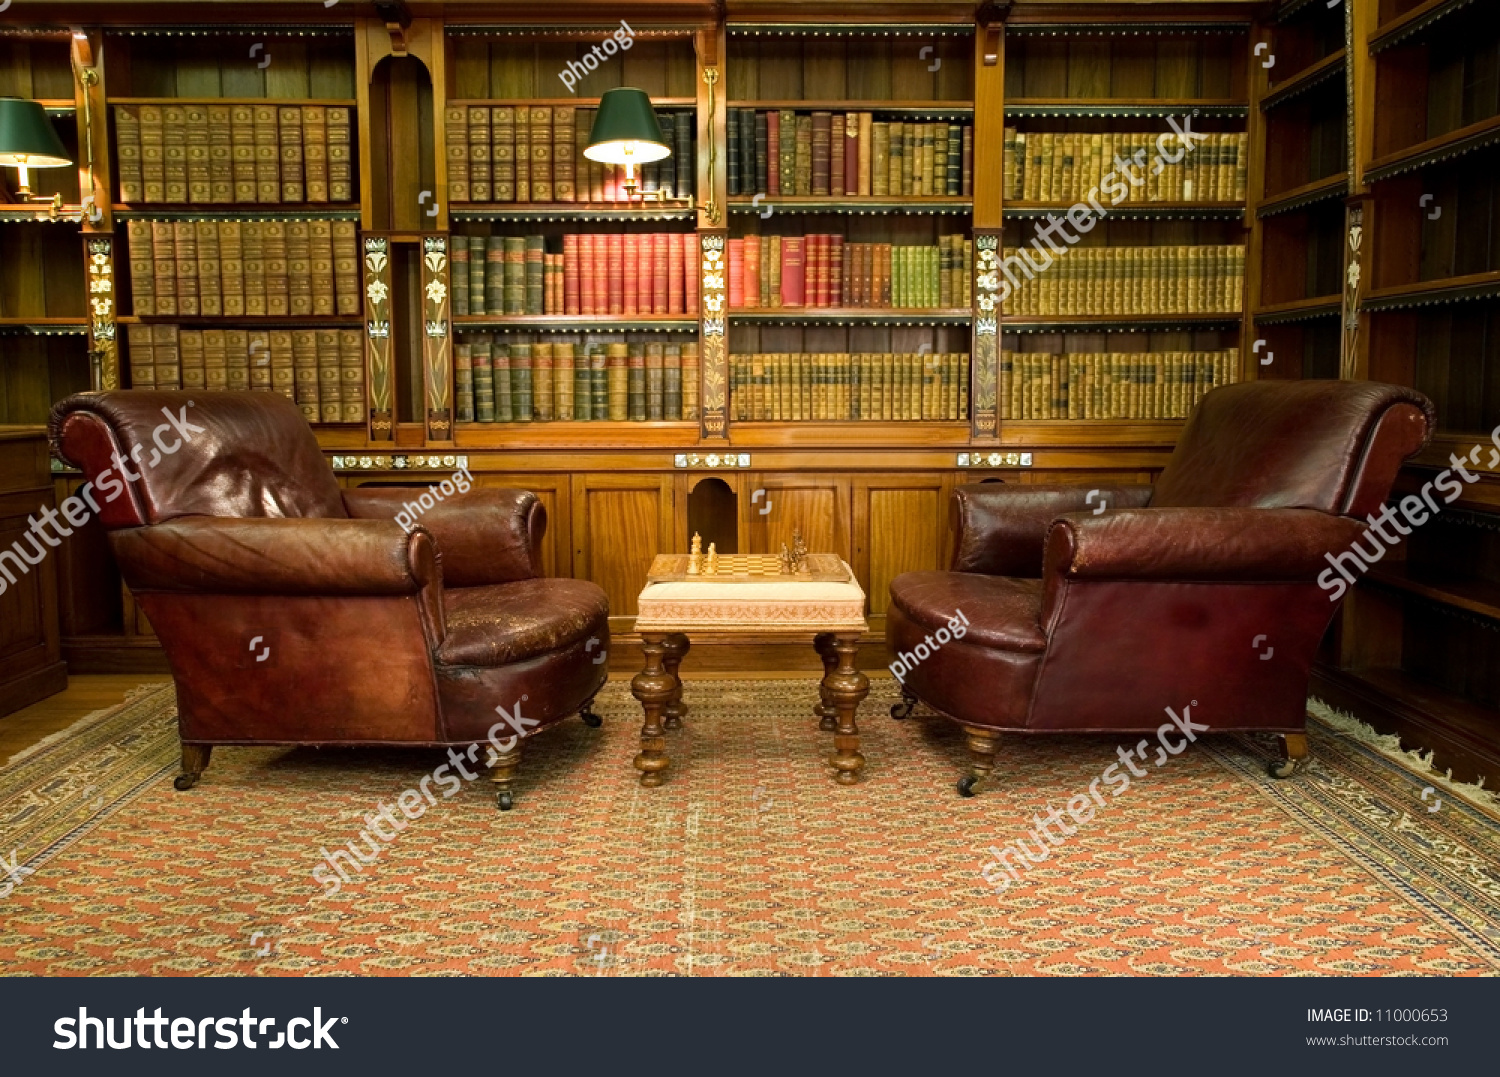 Old studying room with two leather armchairs and chess game #11000653